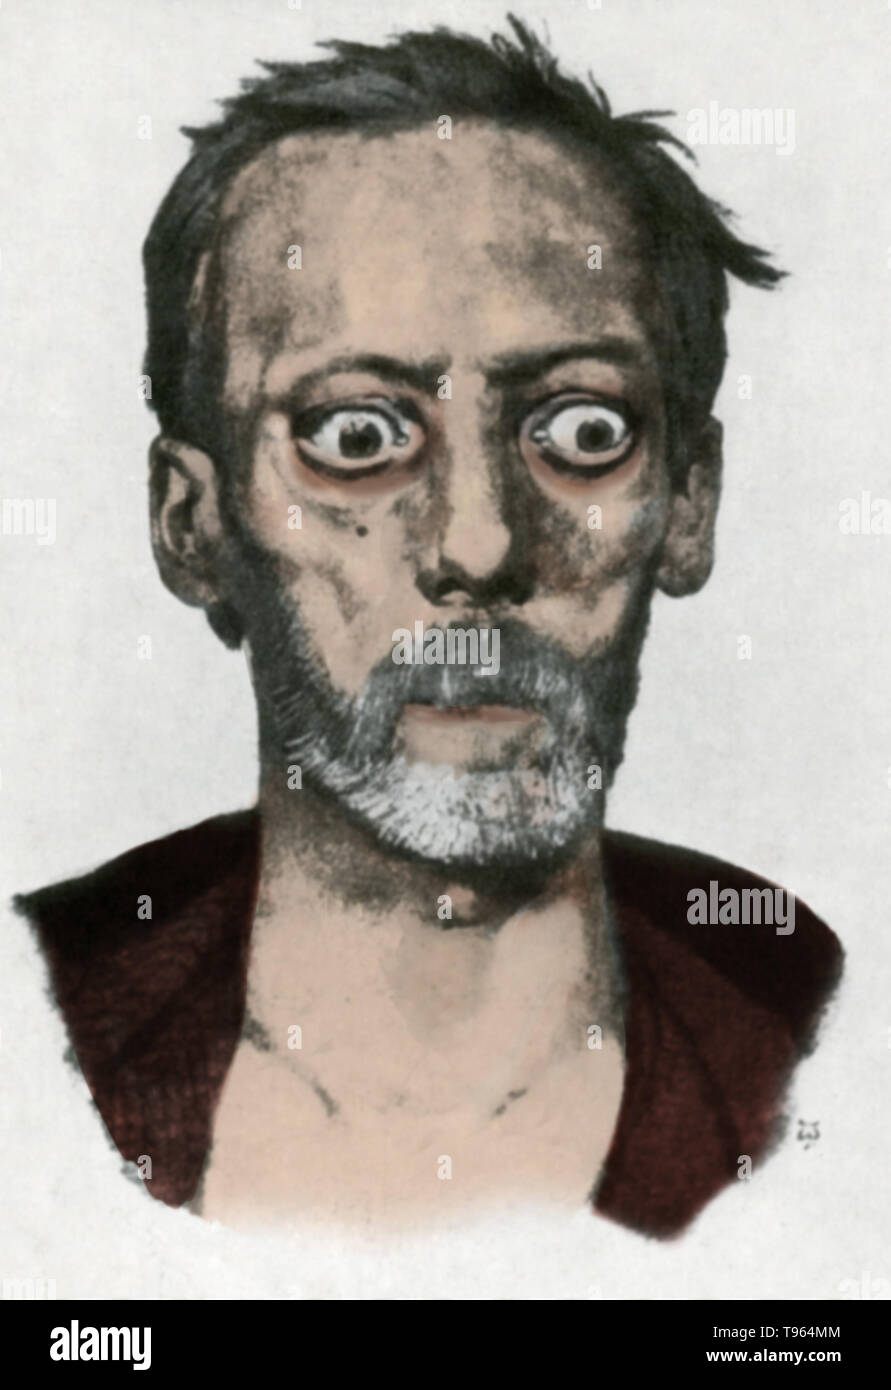 An historical illustration of a patient with Graves' ophthalmopathy (also known as Graves' Disease, Graves' thyroid-associated, or dysthyroid orbitopathy), an autoimmune inflammatory disorder affecting the orbit of the eye, with or without thyroid disorder. Stock Photo